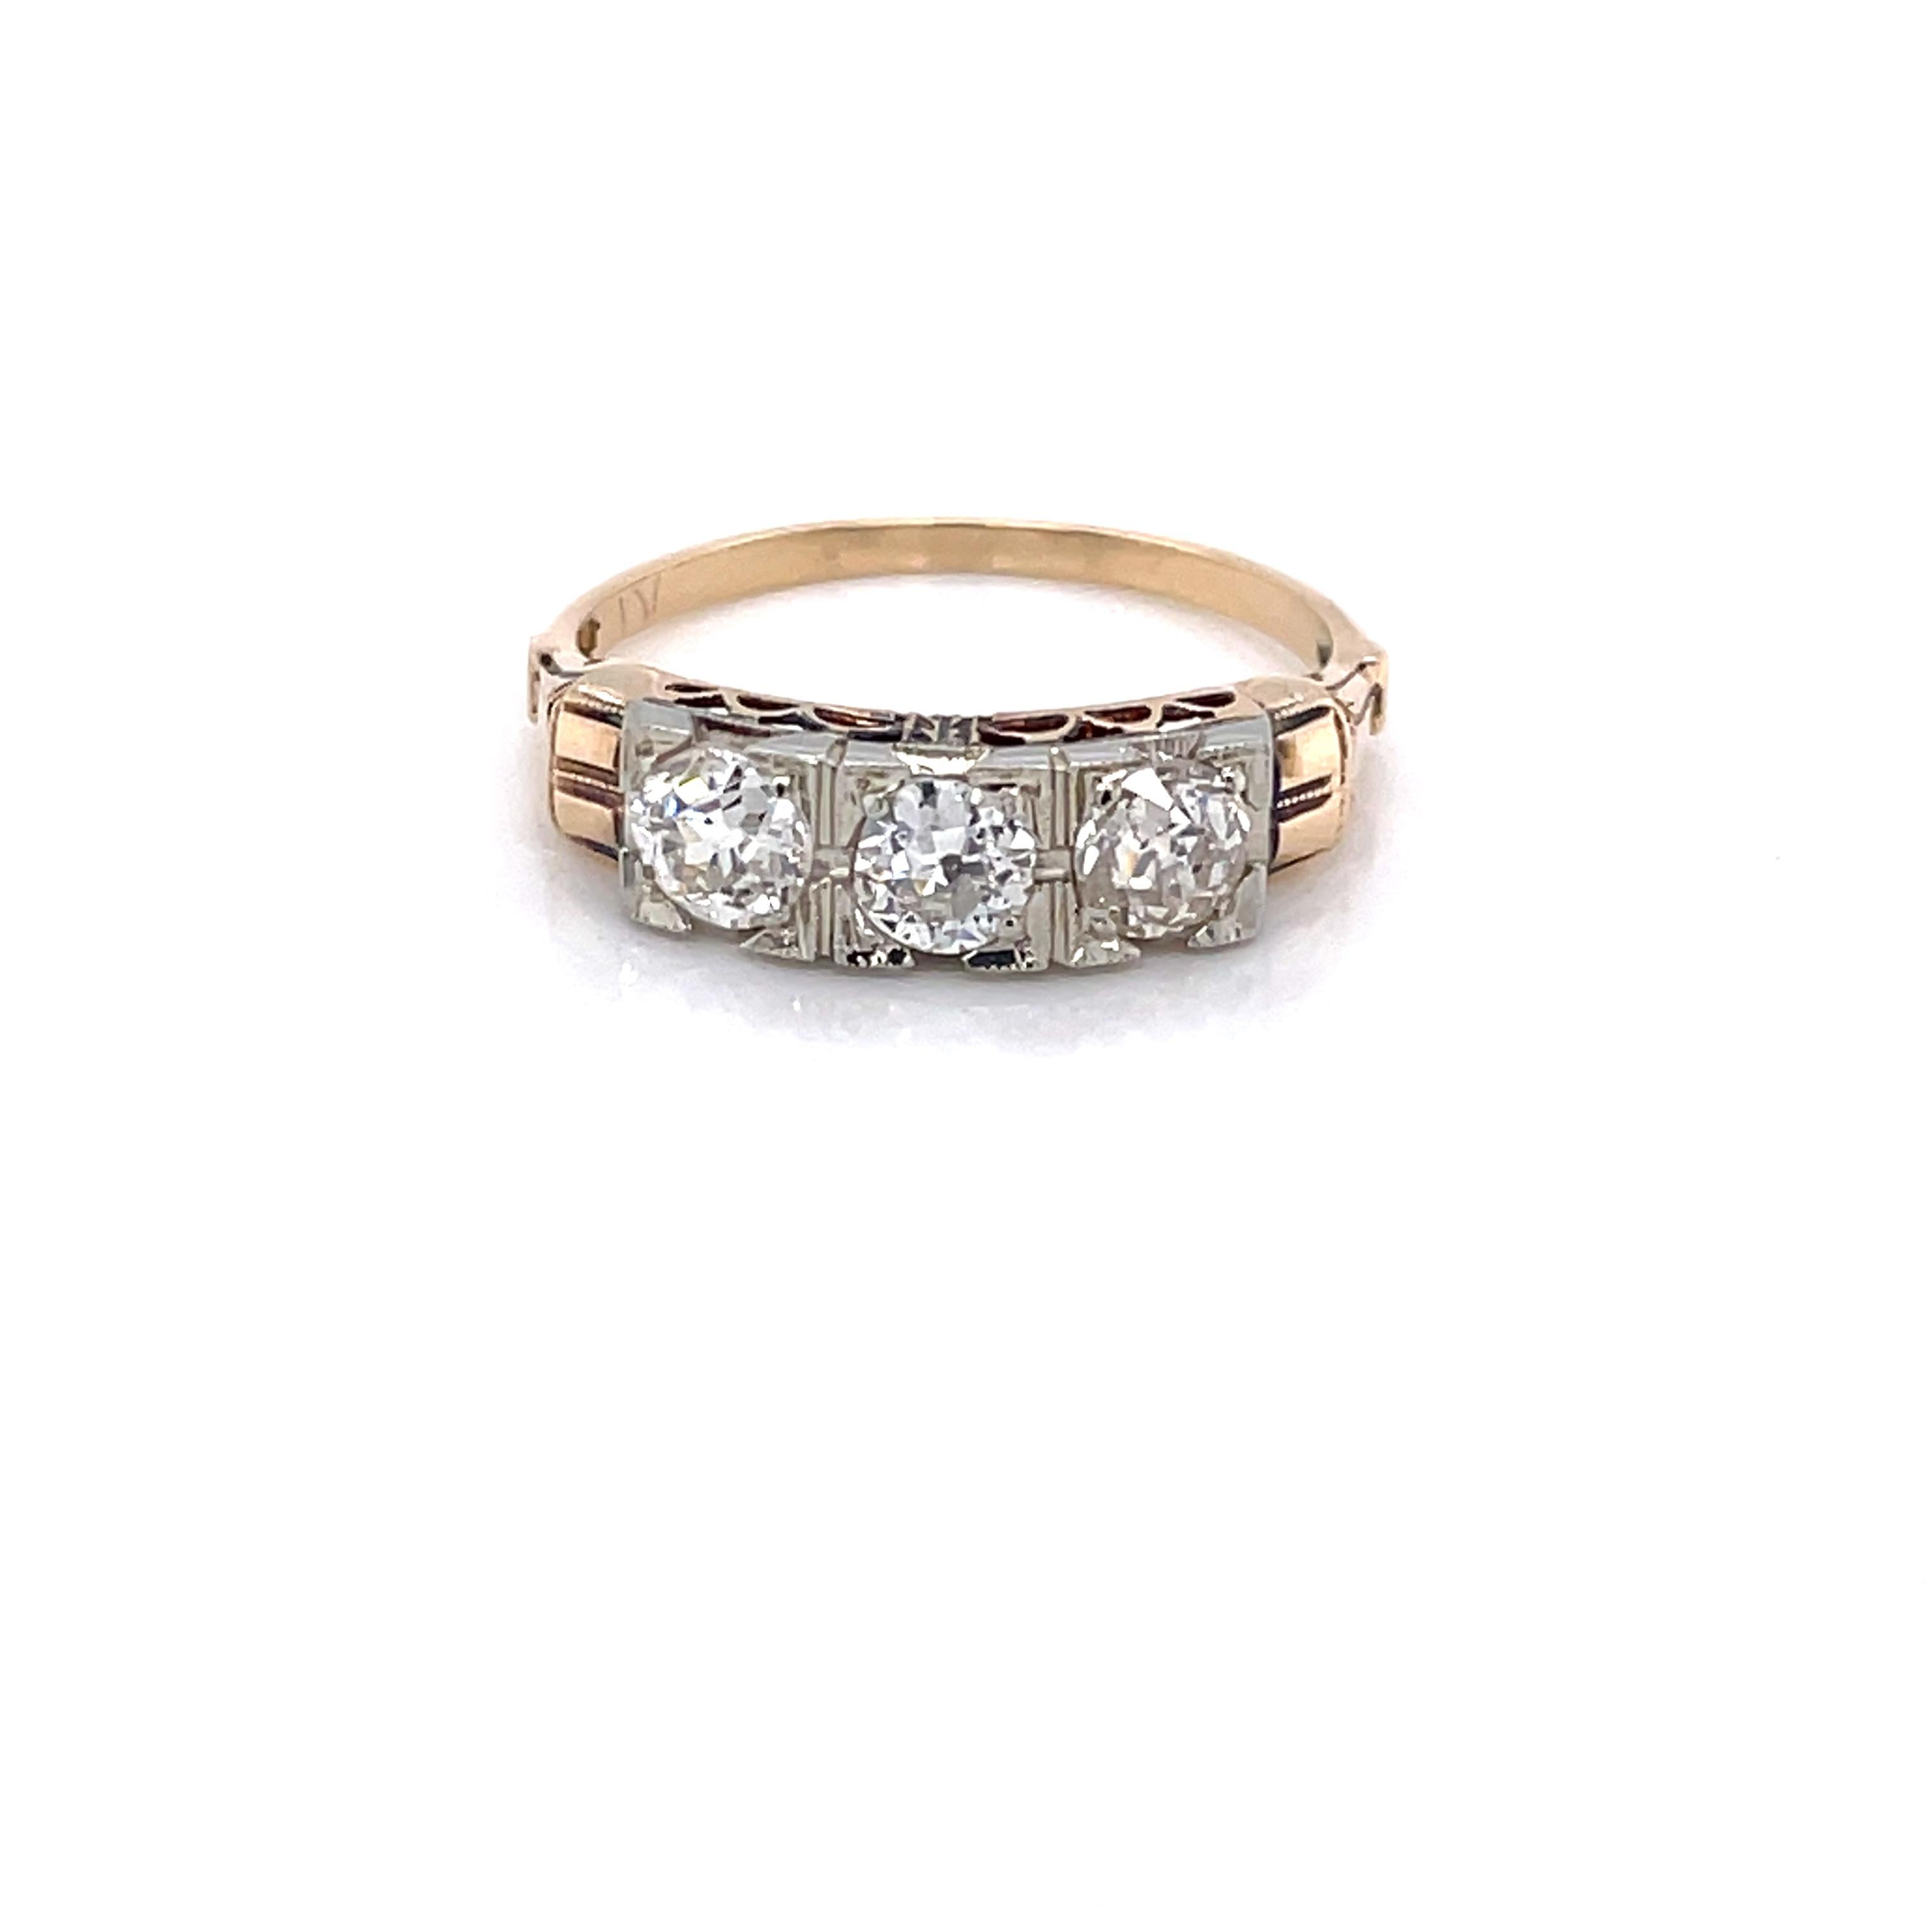 Three Miner's cut diamonds dress the front of the antique fourteen karat 14K ring. The ring's fancy gallery and gallery rail are notable features of this piece. The hand cut diamonds are G/I3 with a total carat weight of .30 carats. The stones do